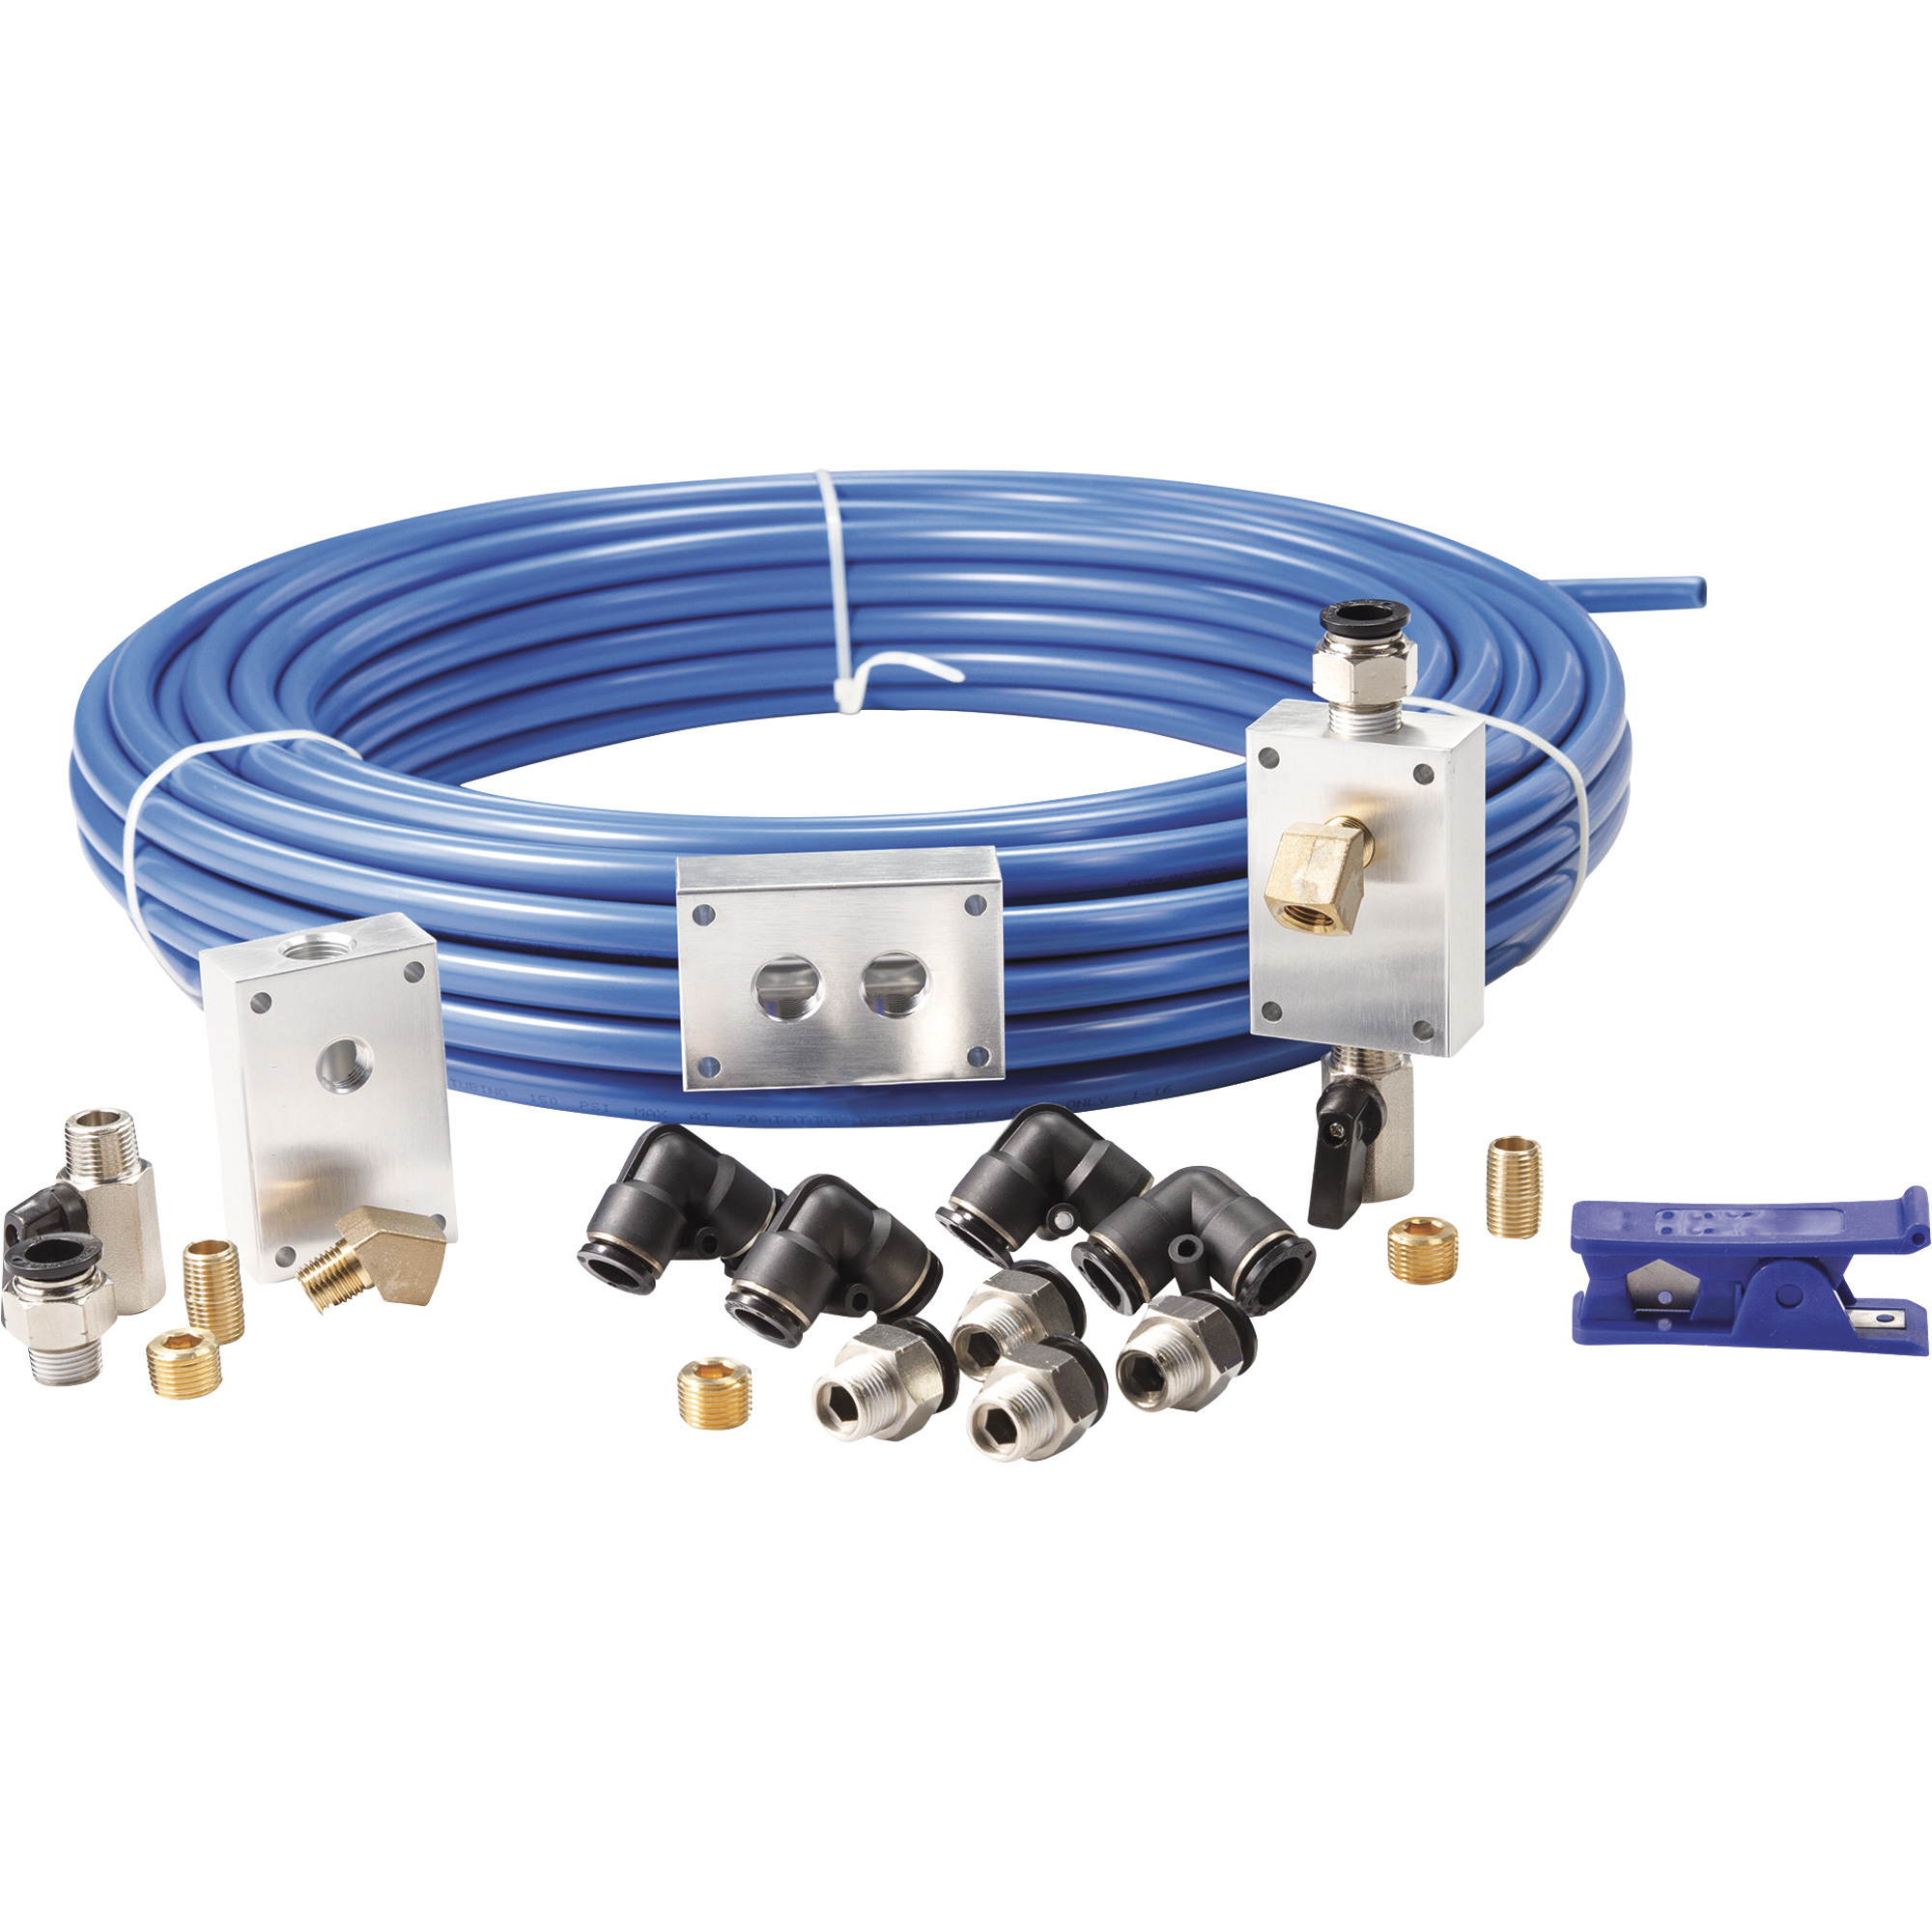 RapidAir 1/2Inch 100ft. Master Compressed Air Piping Kit, Model 90500